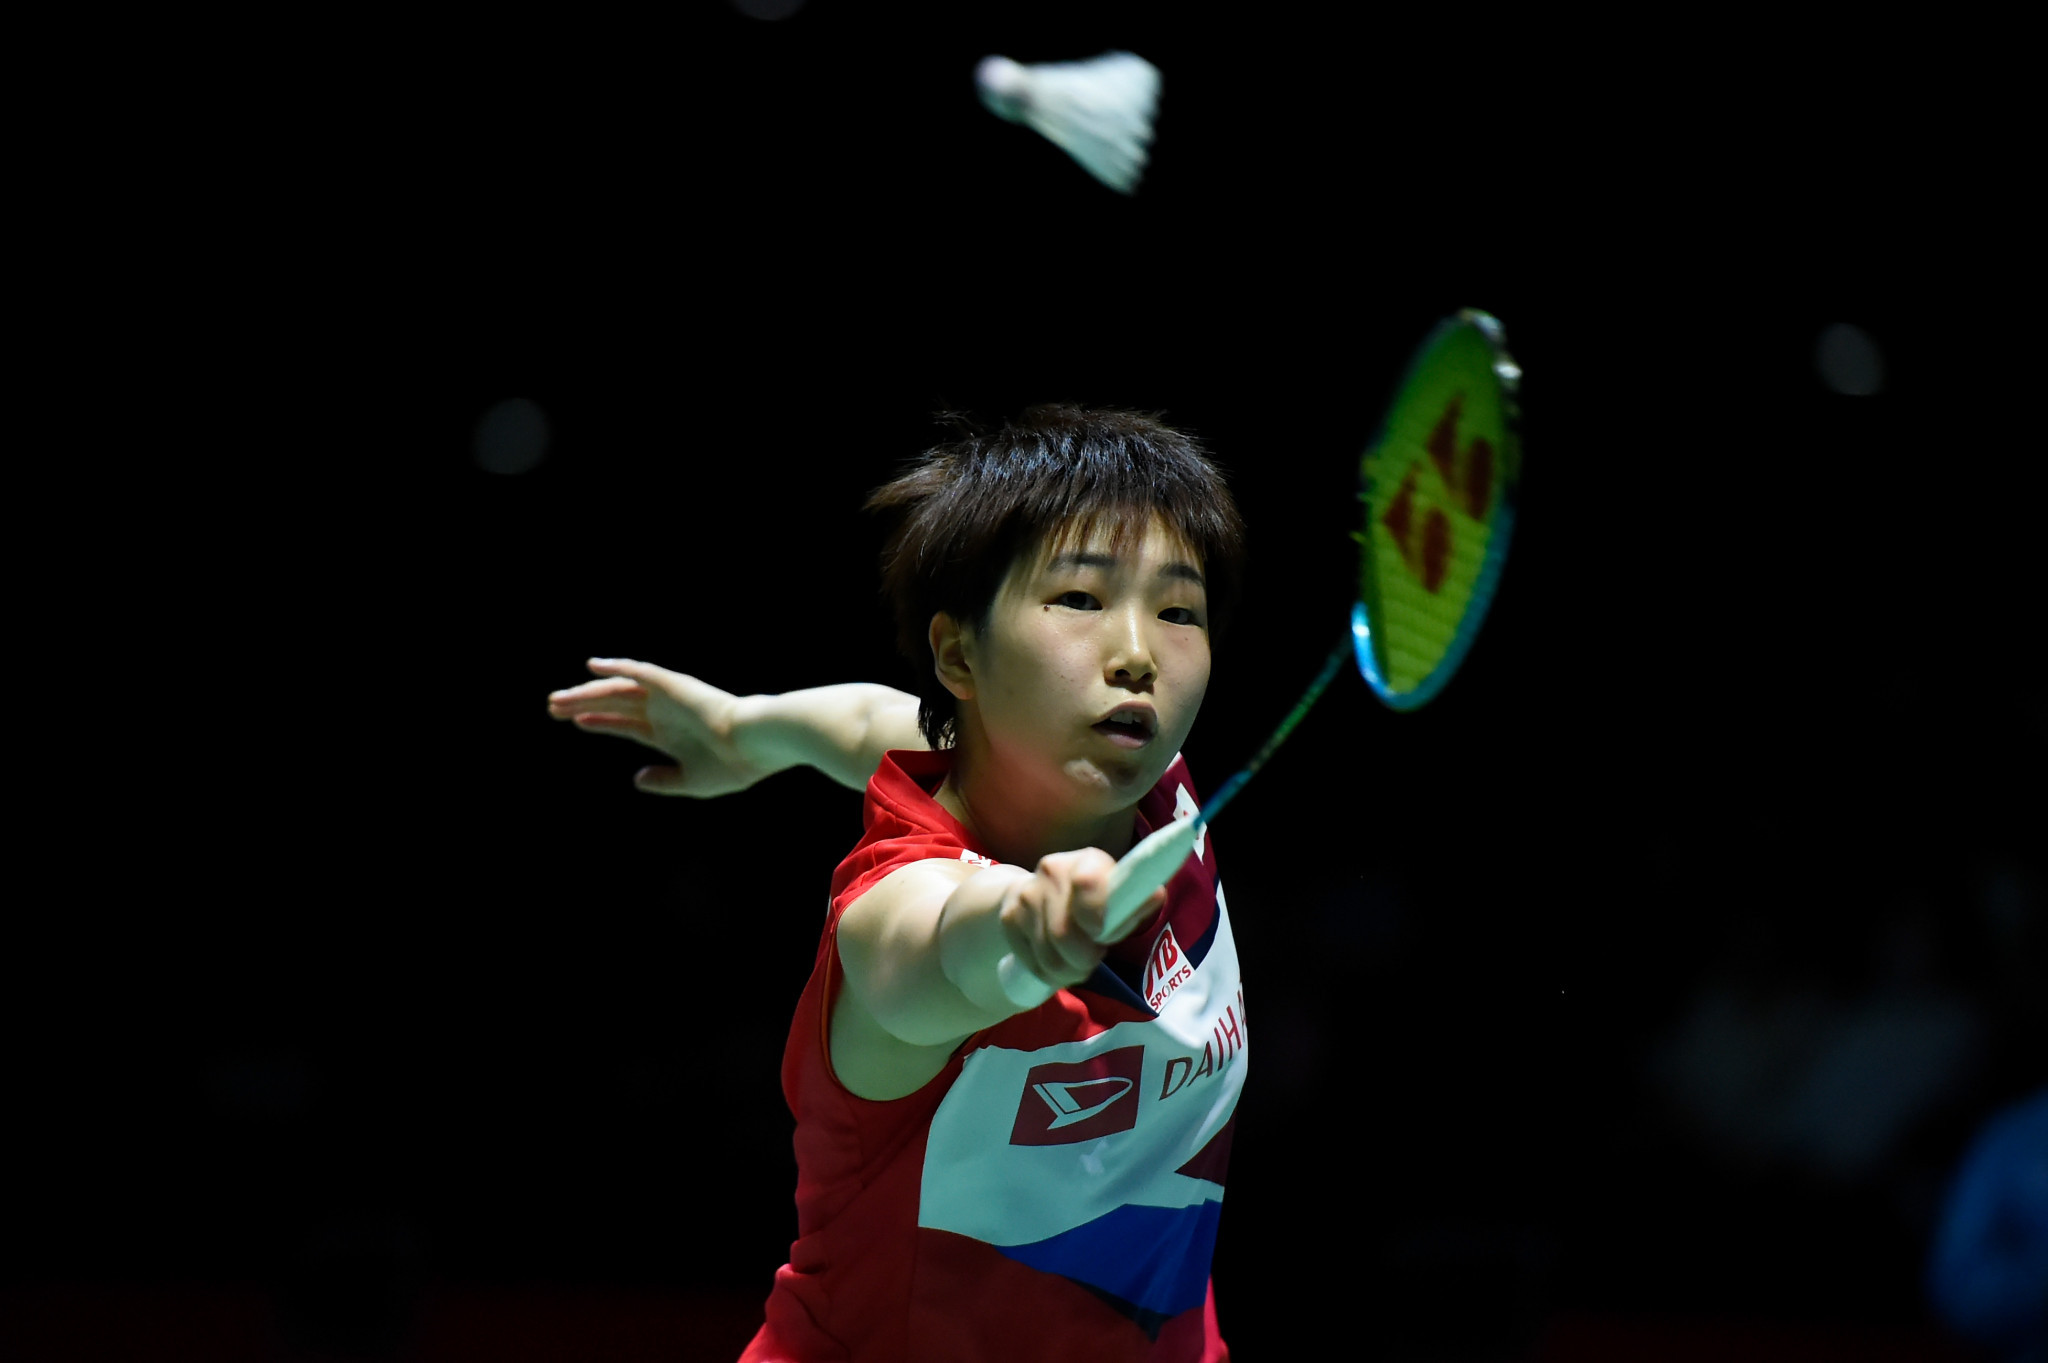 Yamaguchi breezes through as BWF Japan Open and Tokyo 2020 test event continues